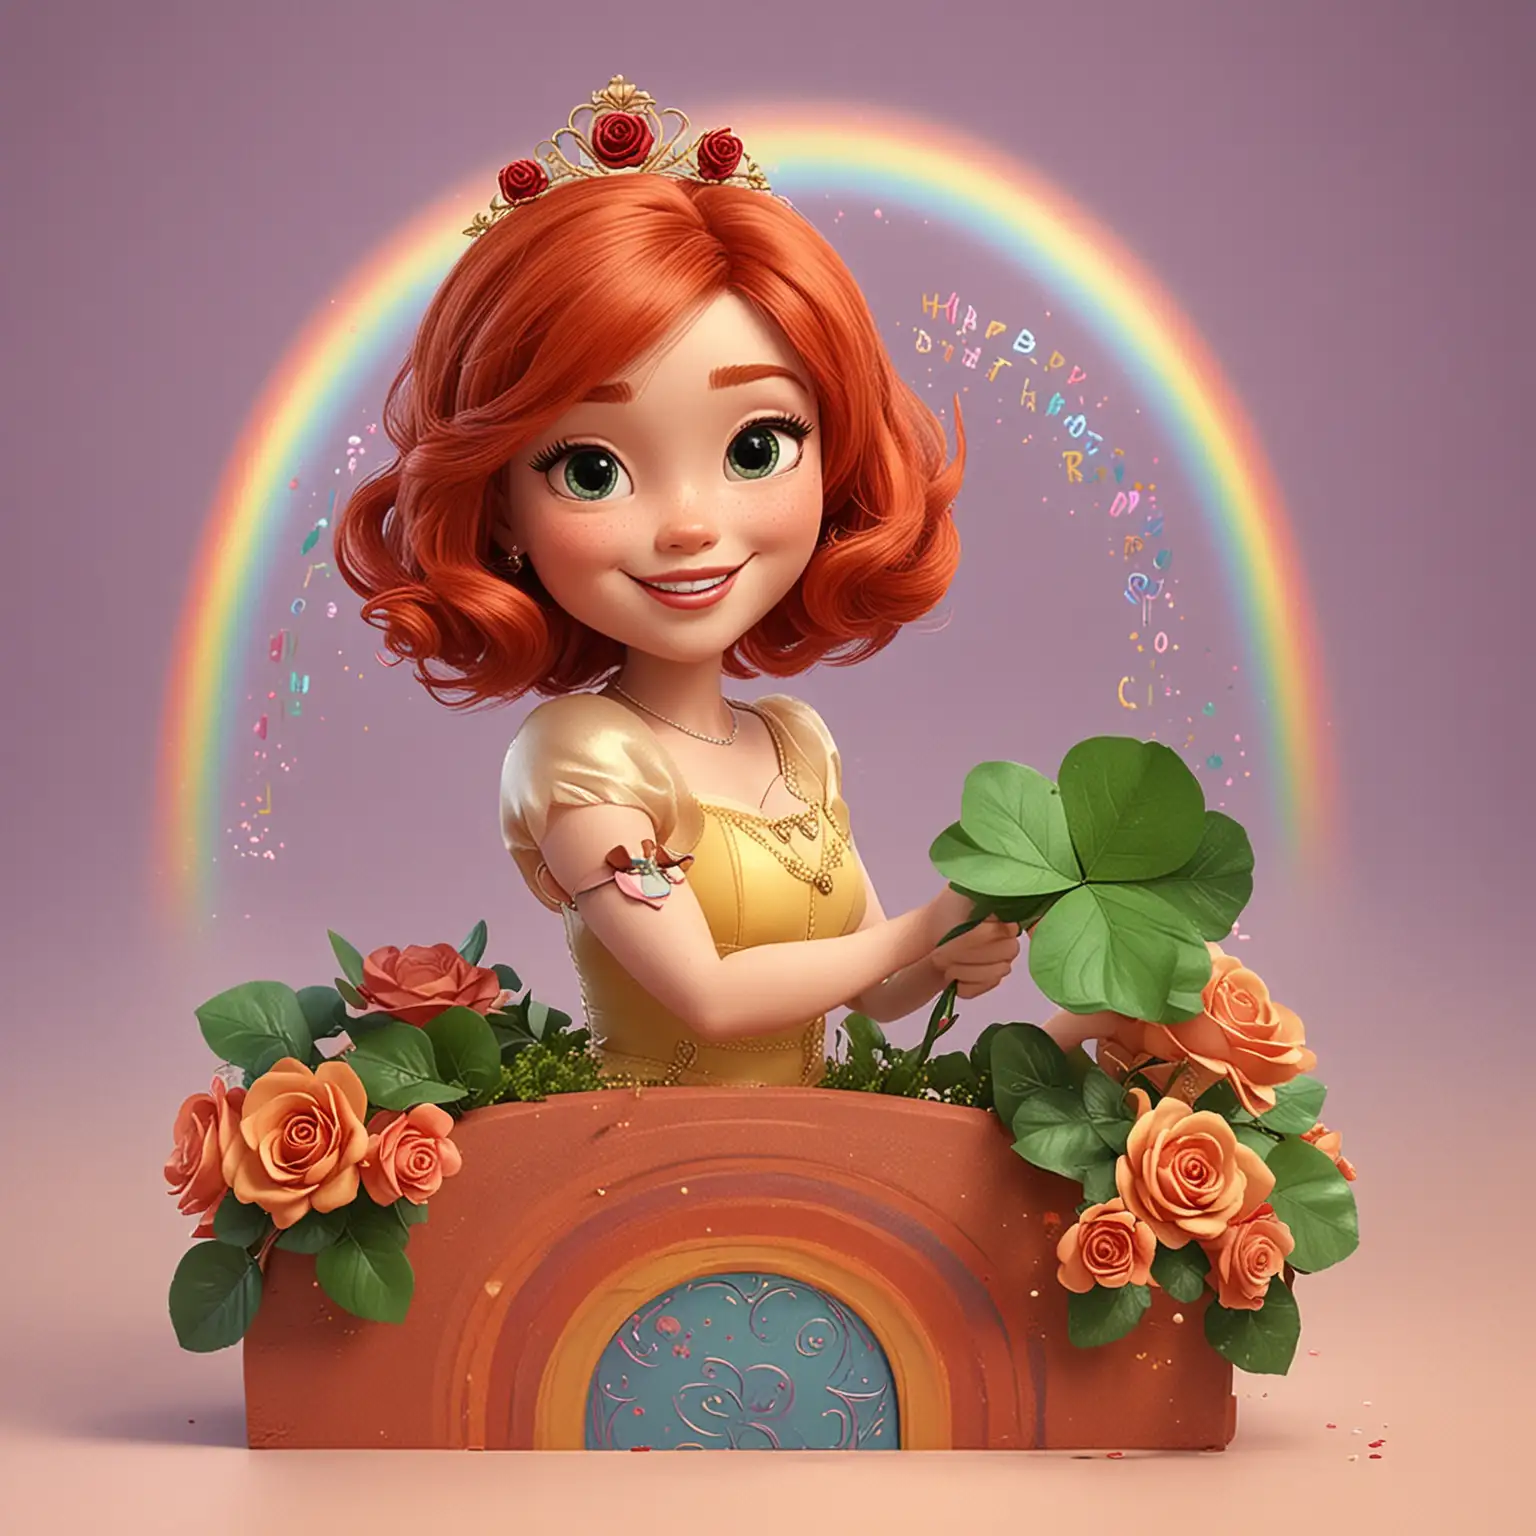 princess sliding on a rainbow,  auburn bob hairstyle parted on the side, holding a rose, with a 4 leaf clover bush, happy birthday!, in the style of Disney animation, disney princess